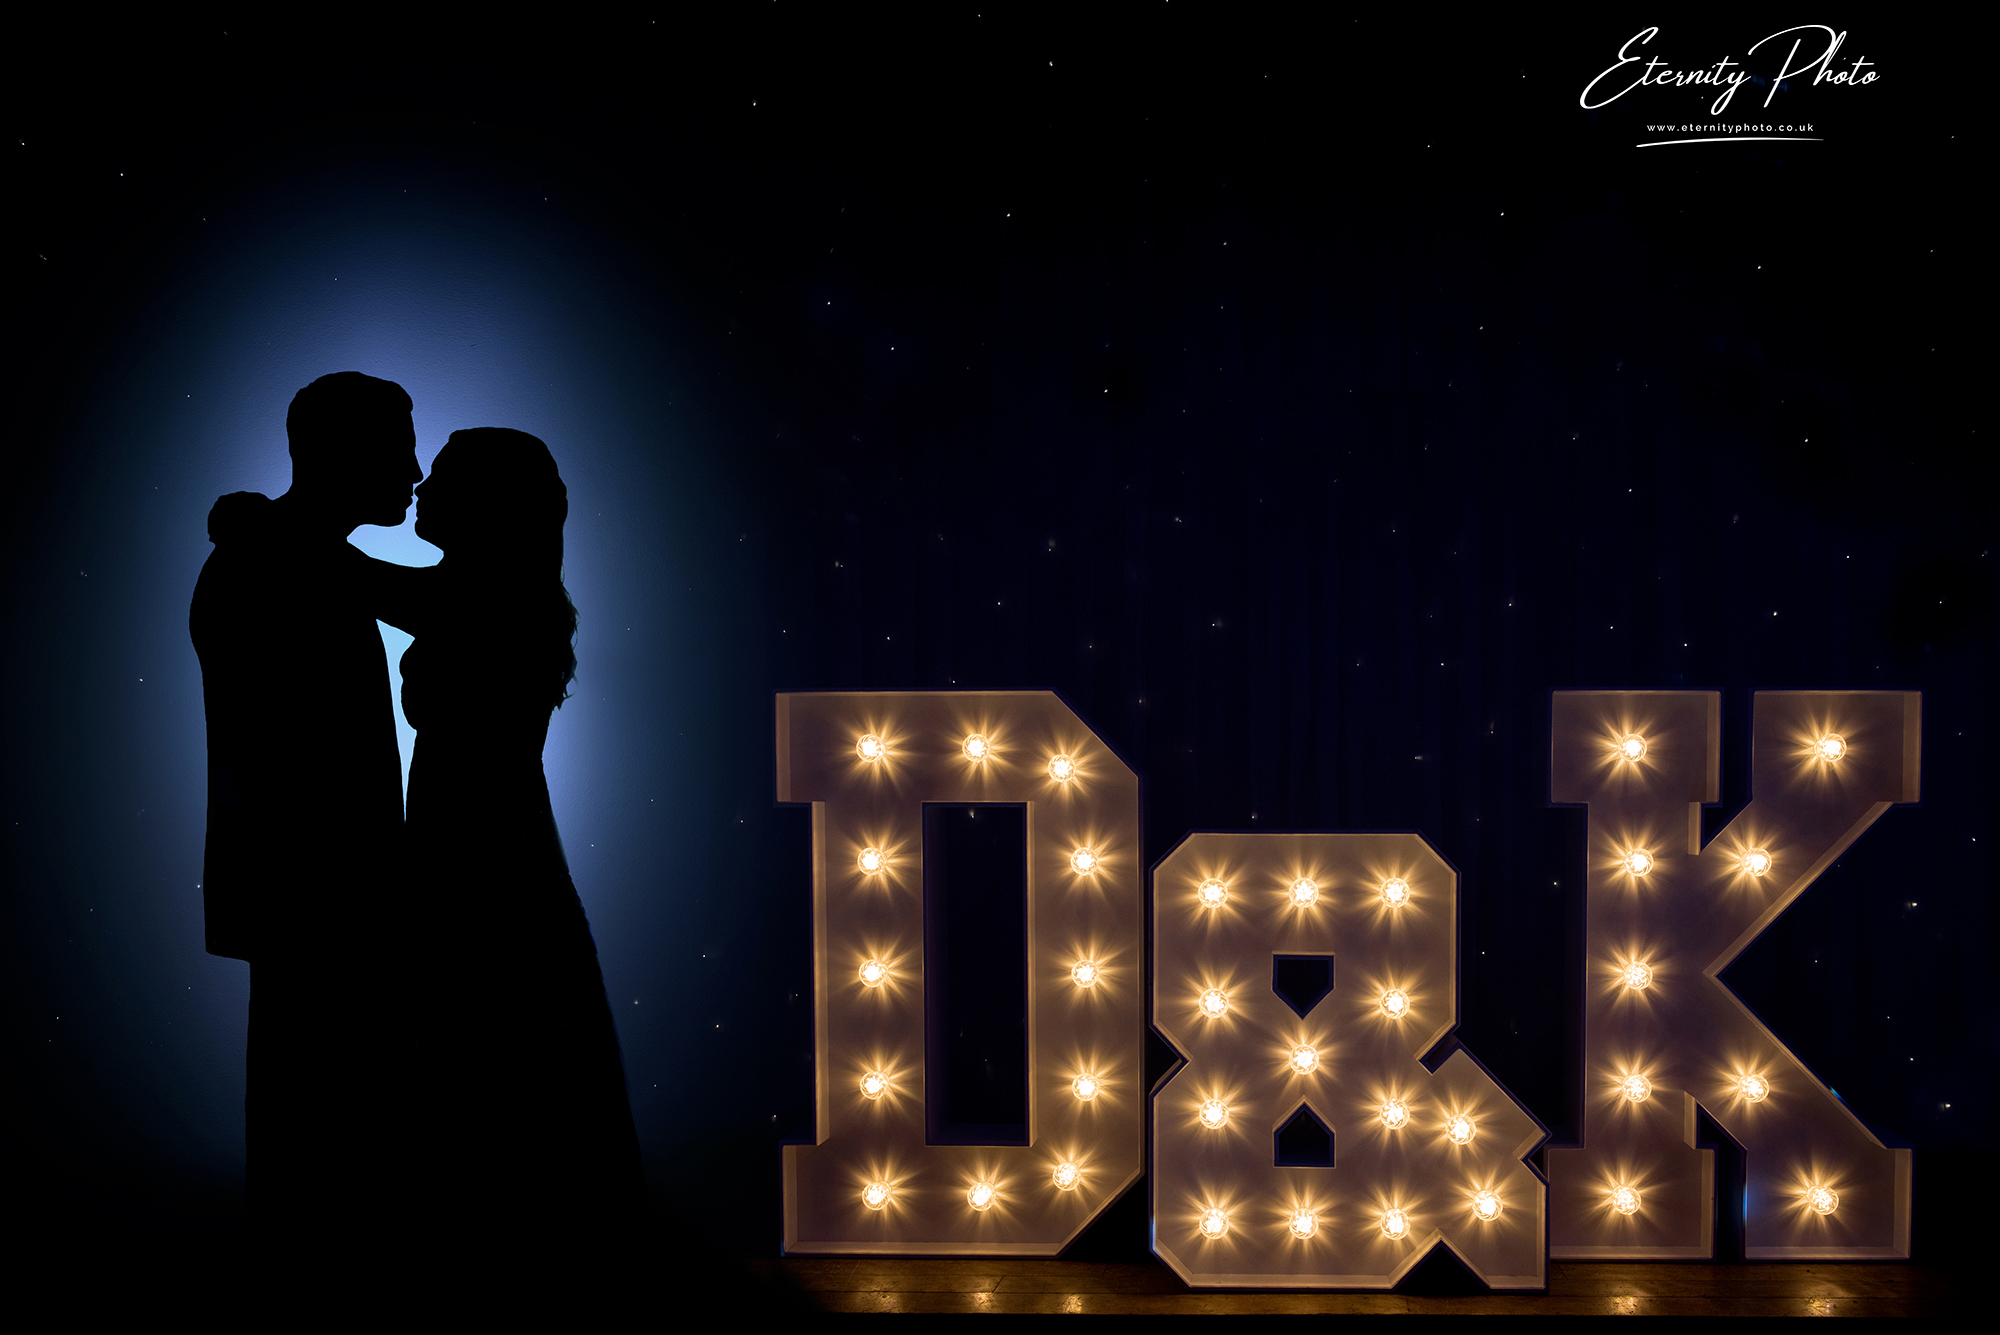 Silhouette of couple with illuminated initials "D & K".